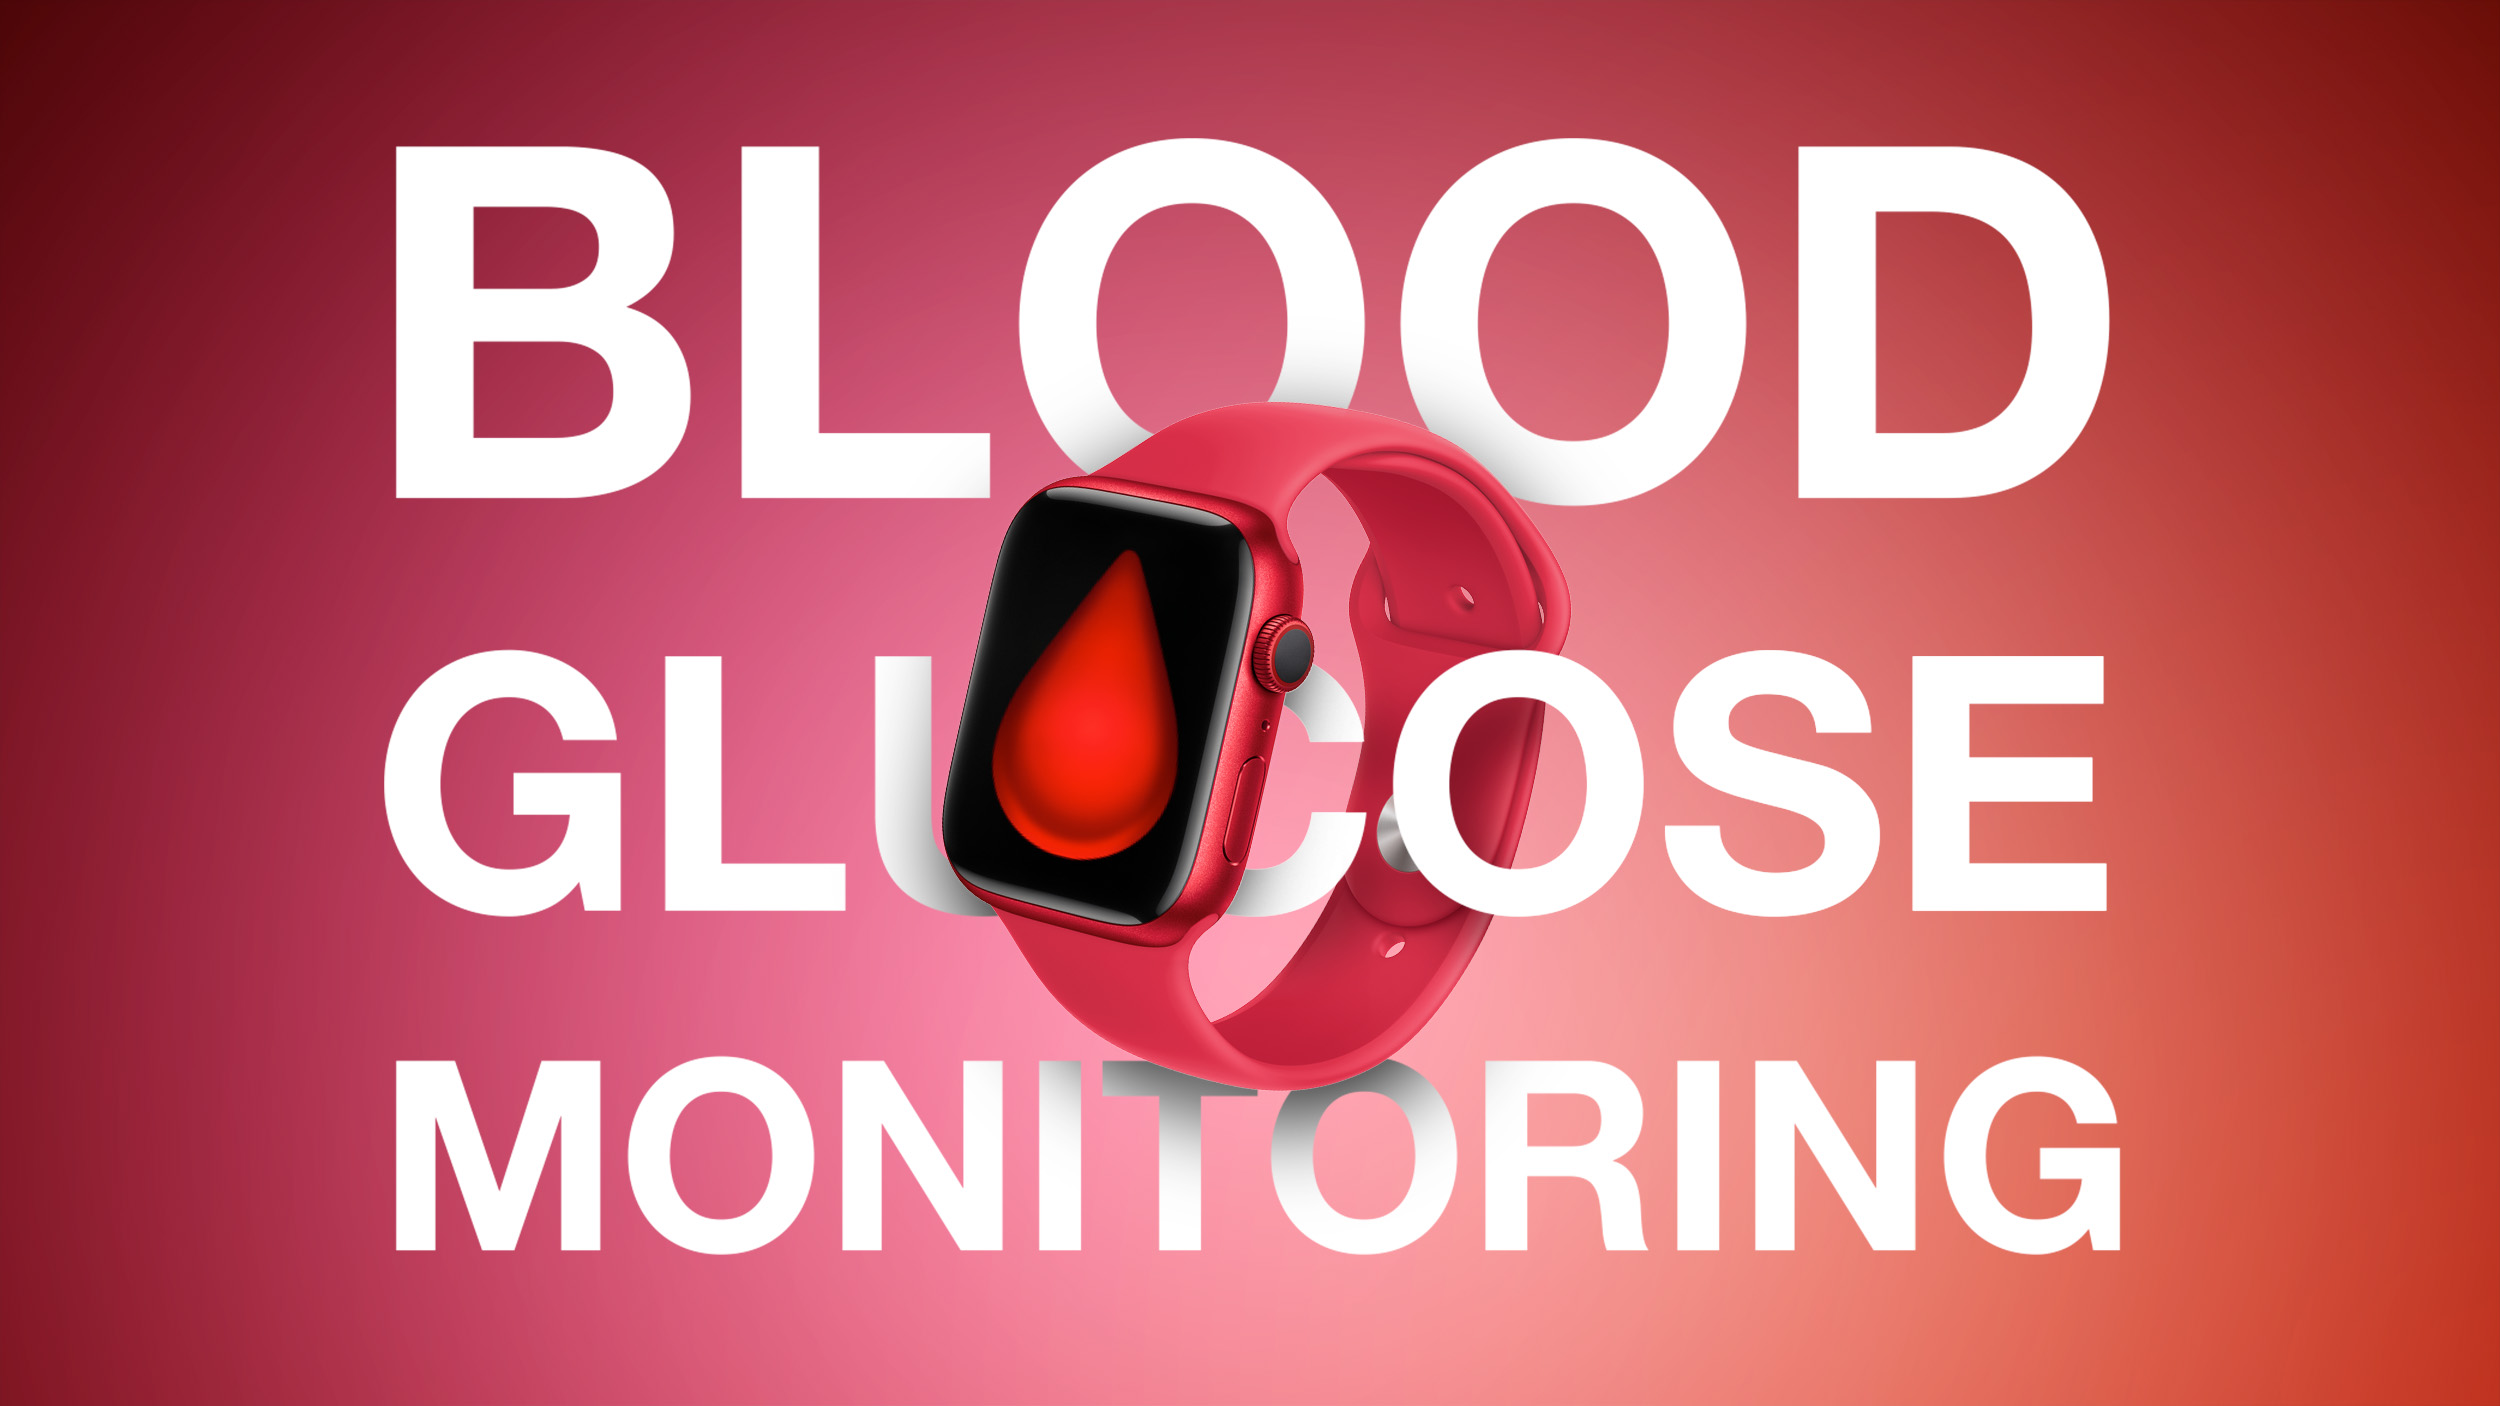 Apple Watch Blood Glucose Monitoring Likely Still ‘Three to Seven Years’ Away